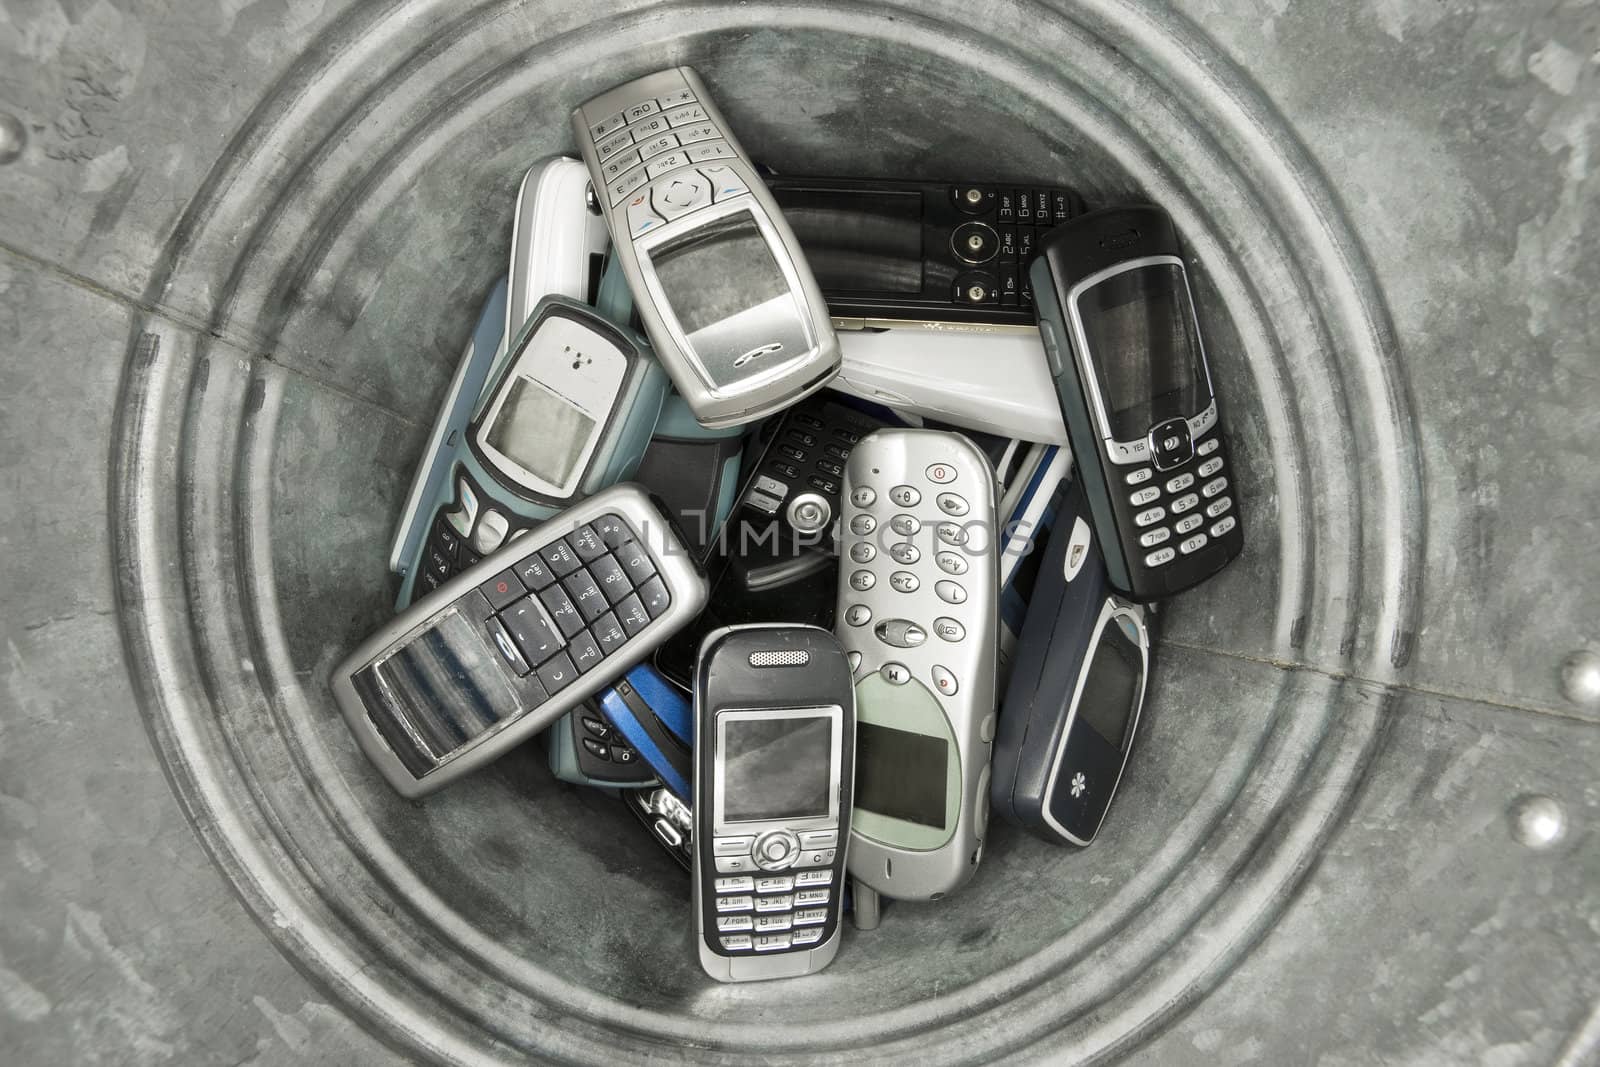 Abjected cellphones by gemenacom